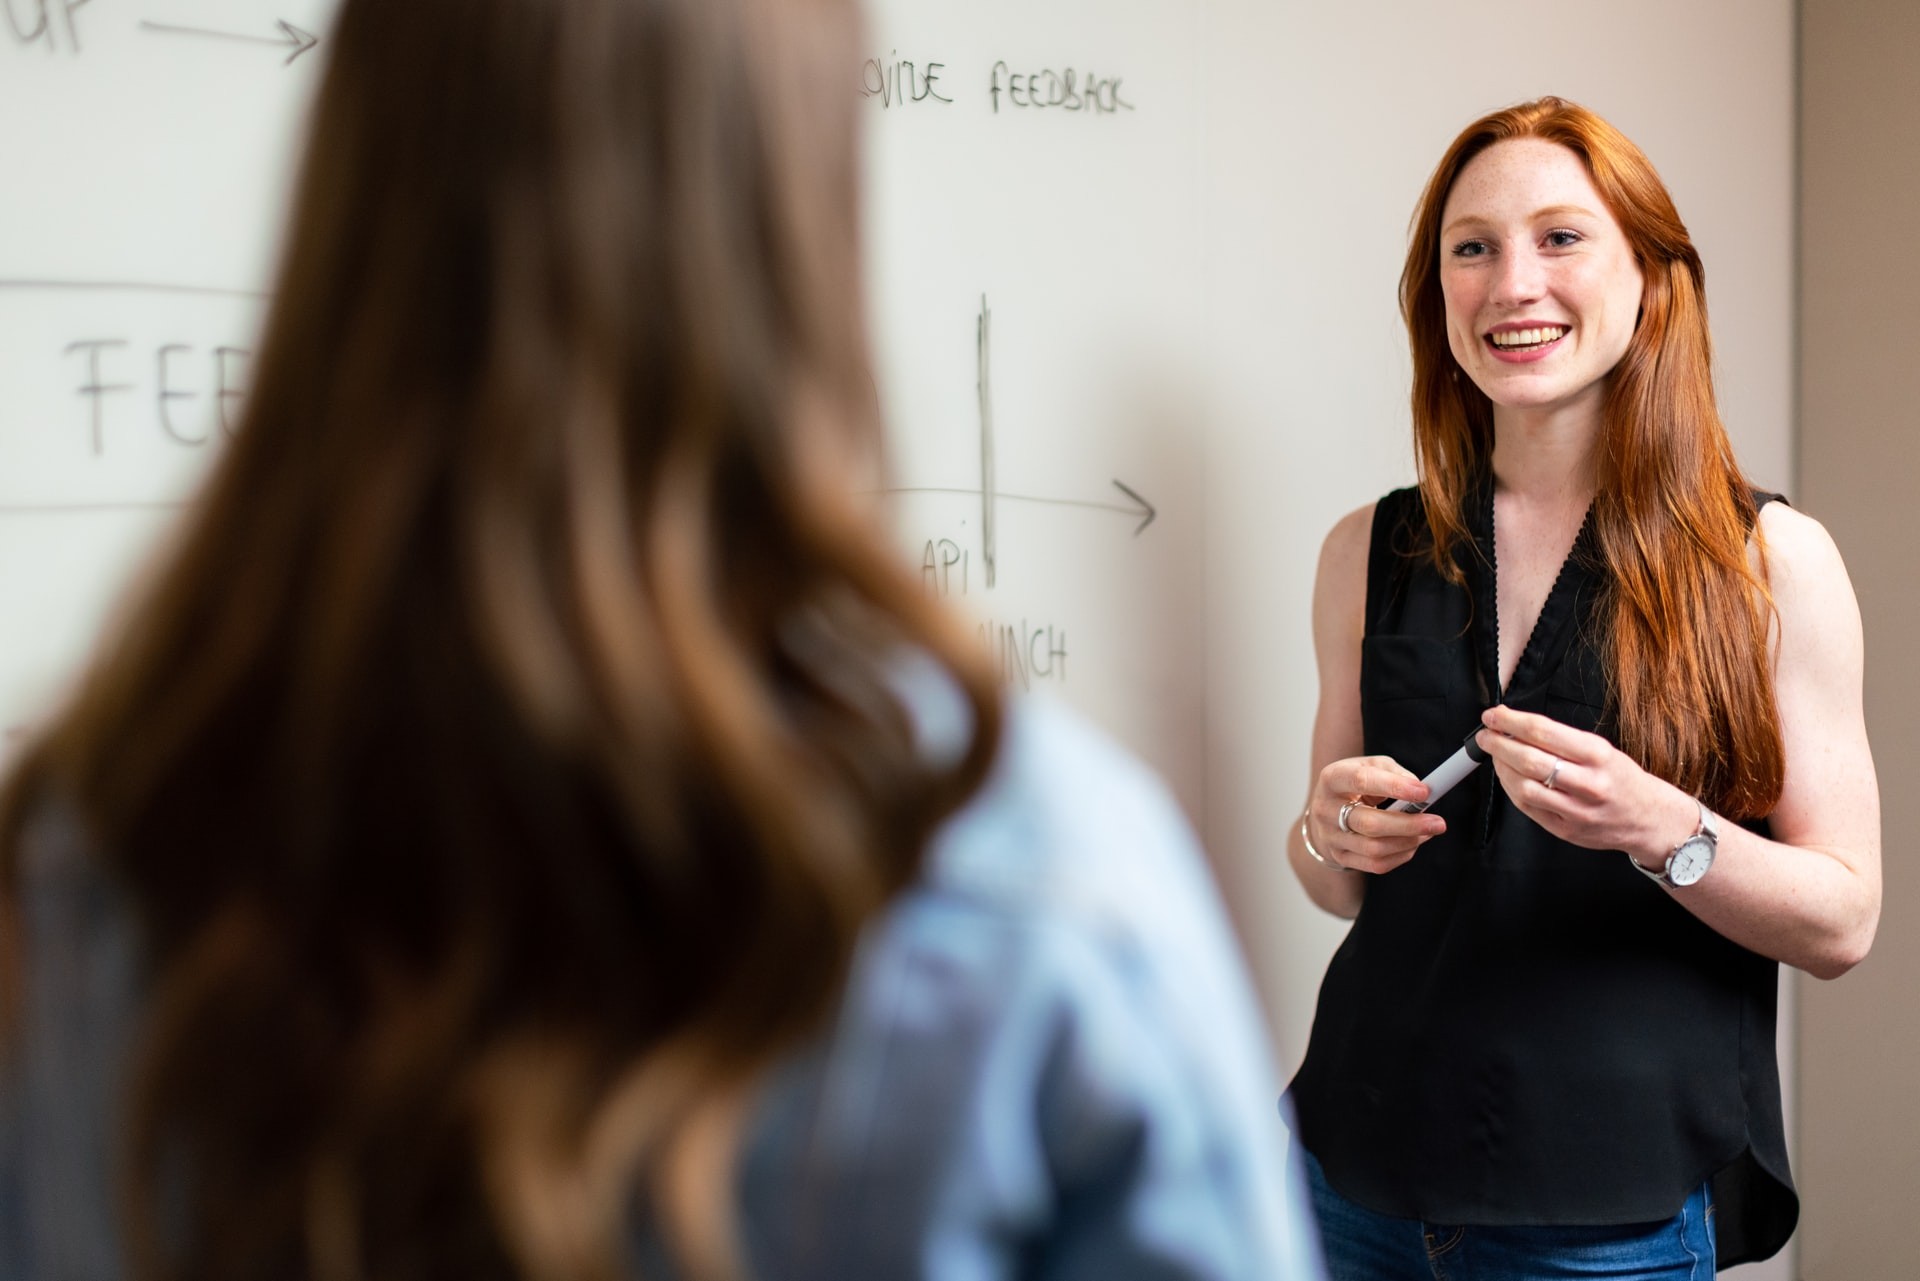 A teacher talks to a student while standing in front of a whiteboard.